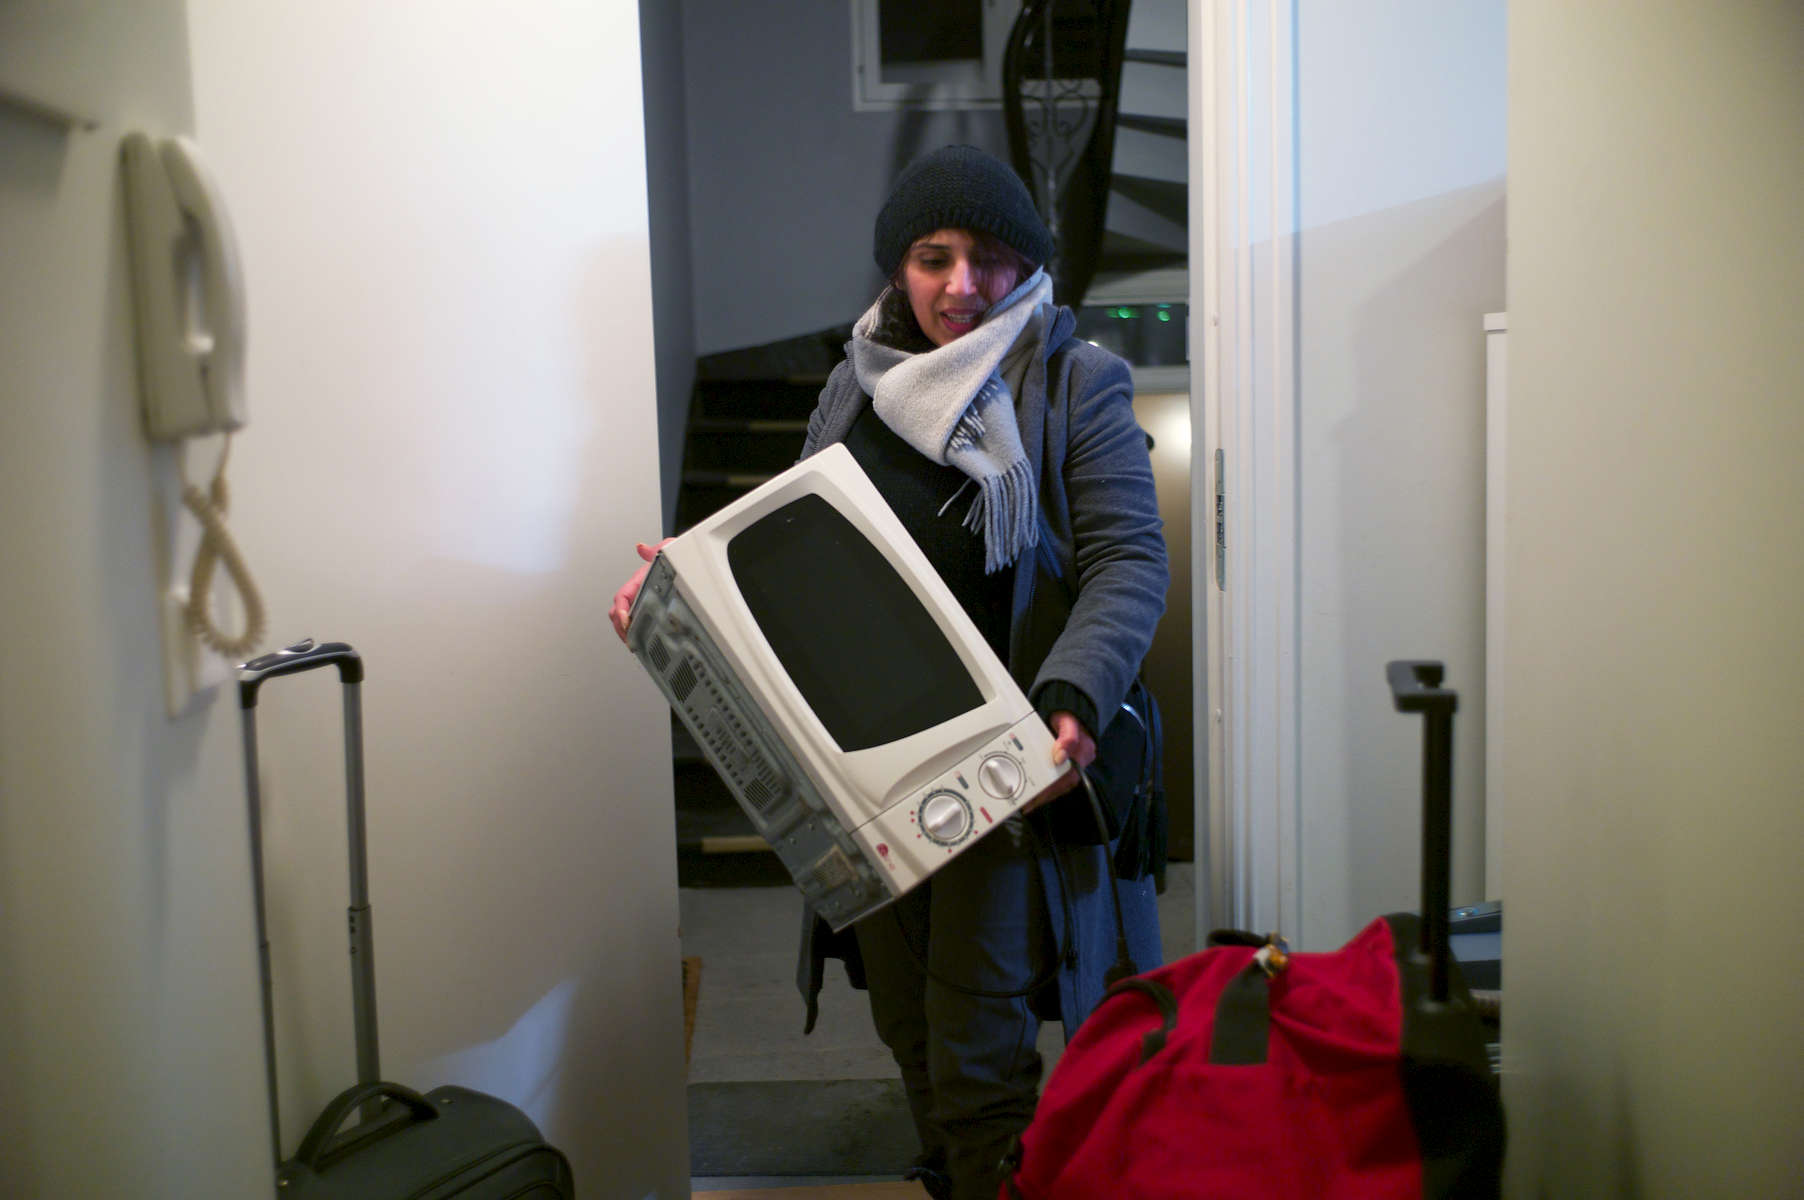 Rejected asylum seeker enters apartment doorway carrying a microwave oven.